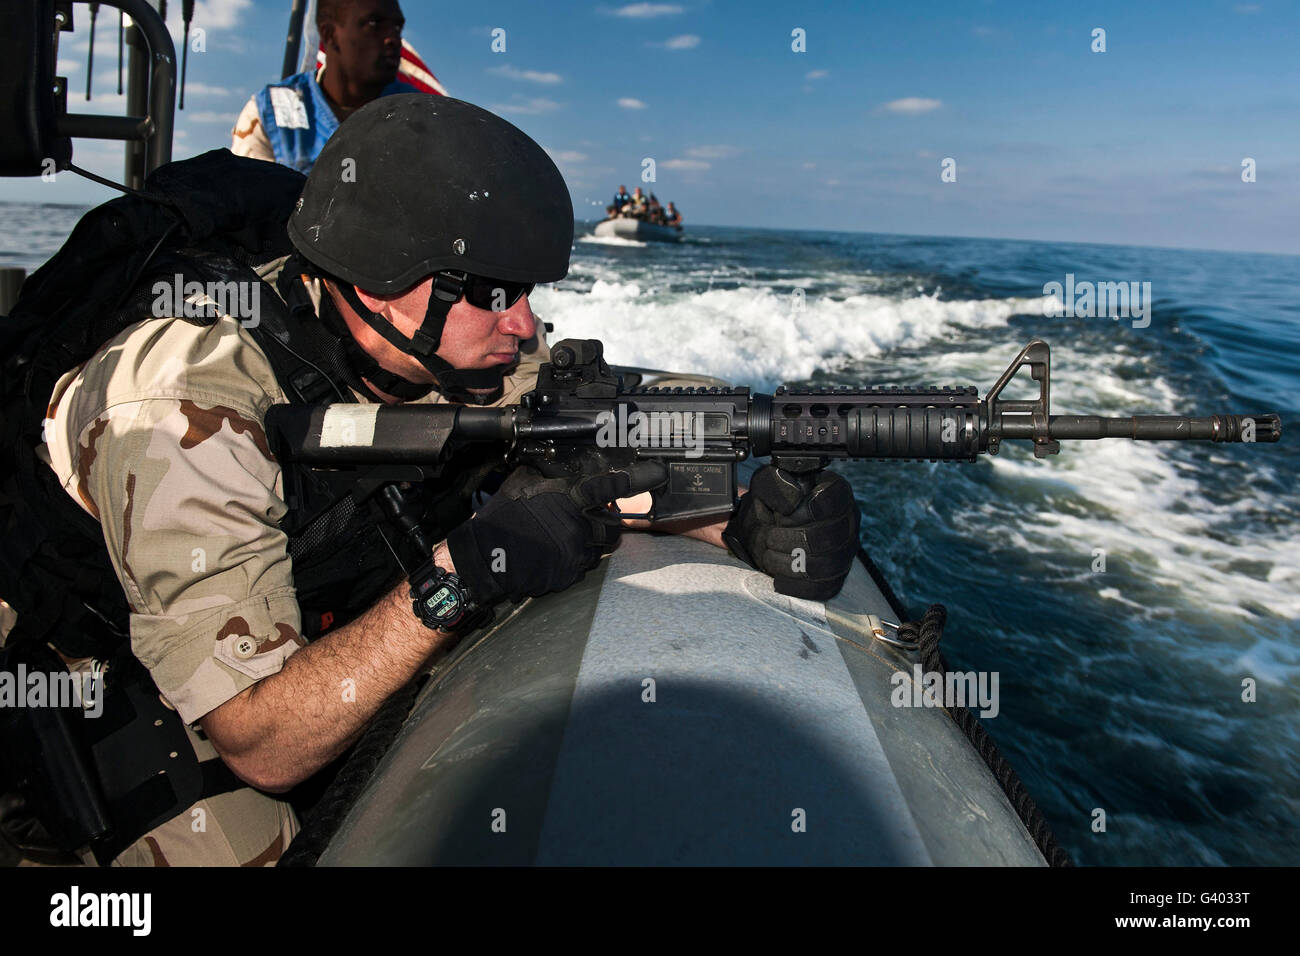 Soldier assumes a ready-to-fire position aboard a rigid-hull inflatable boat. Stock Photo